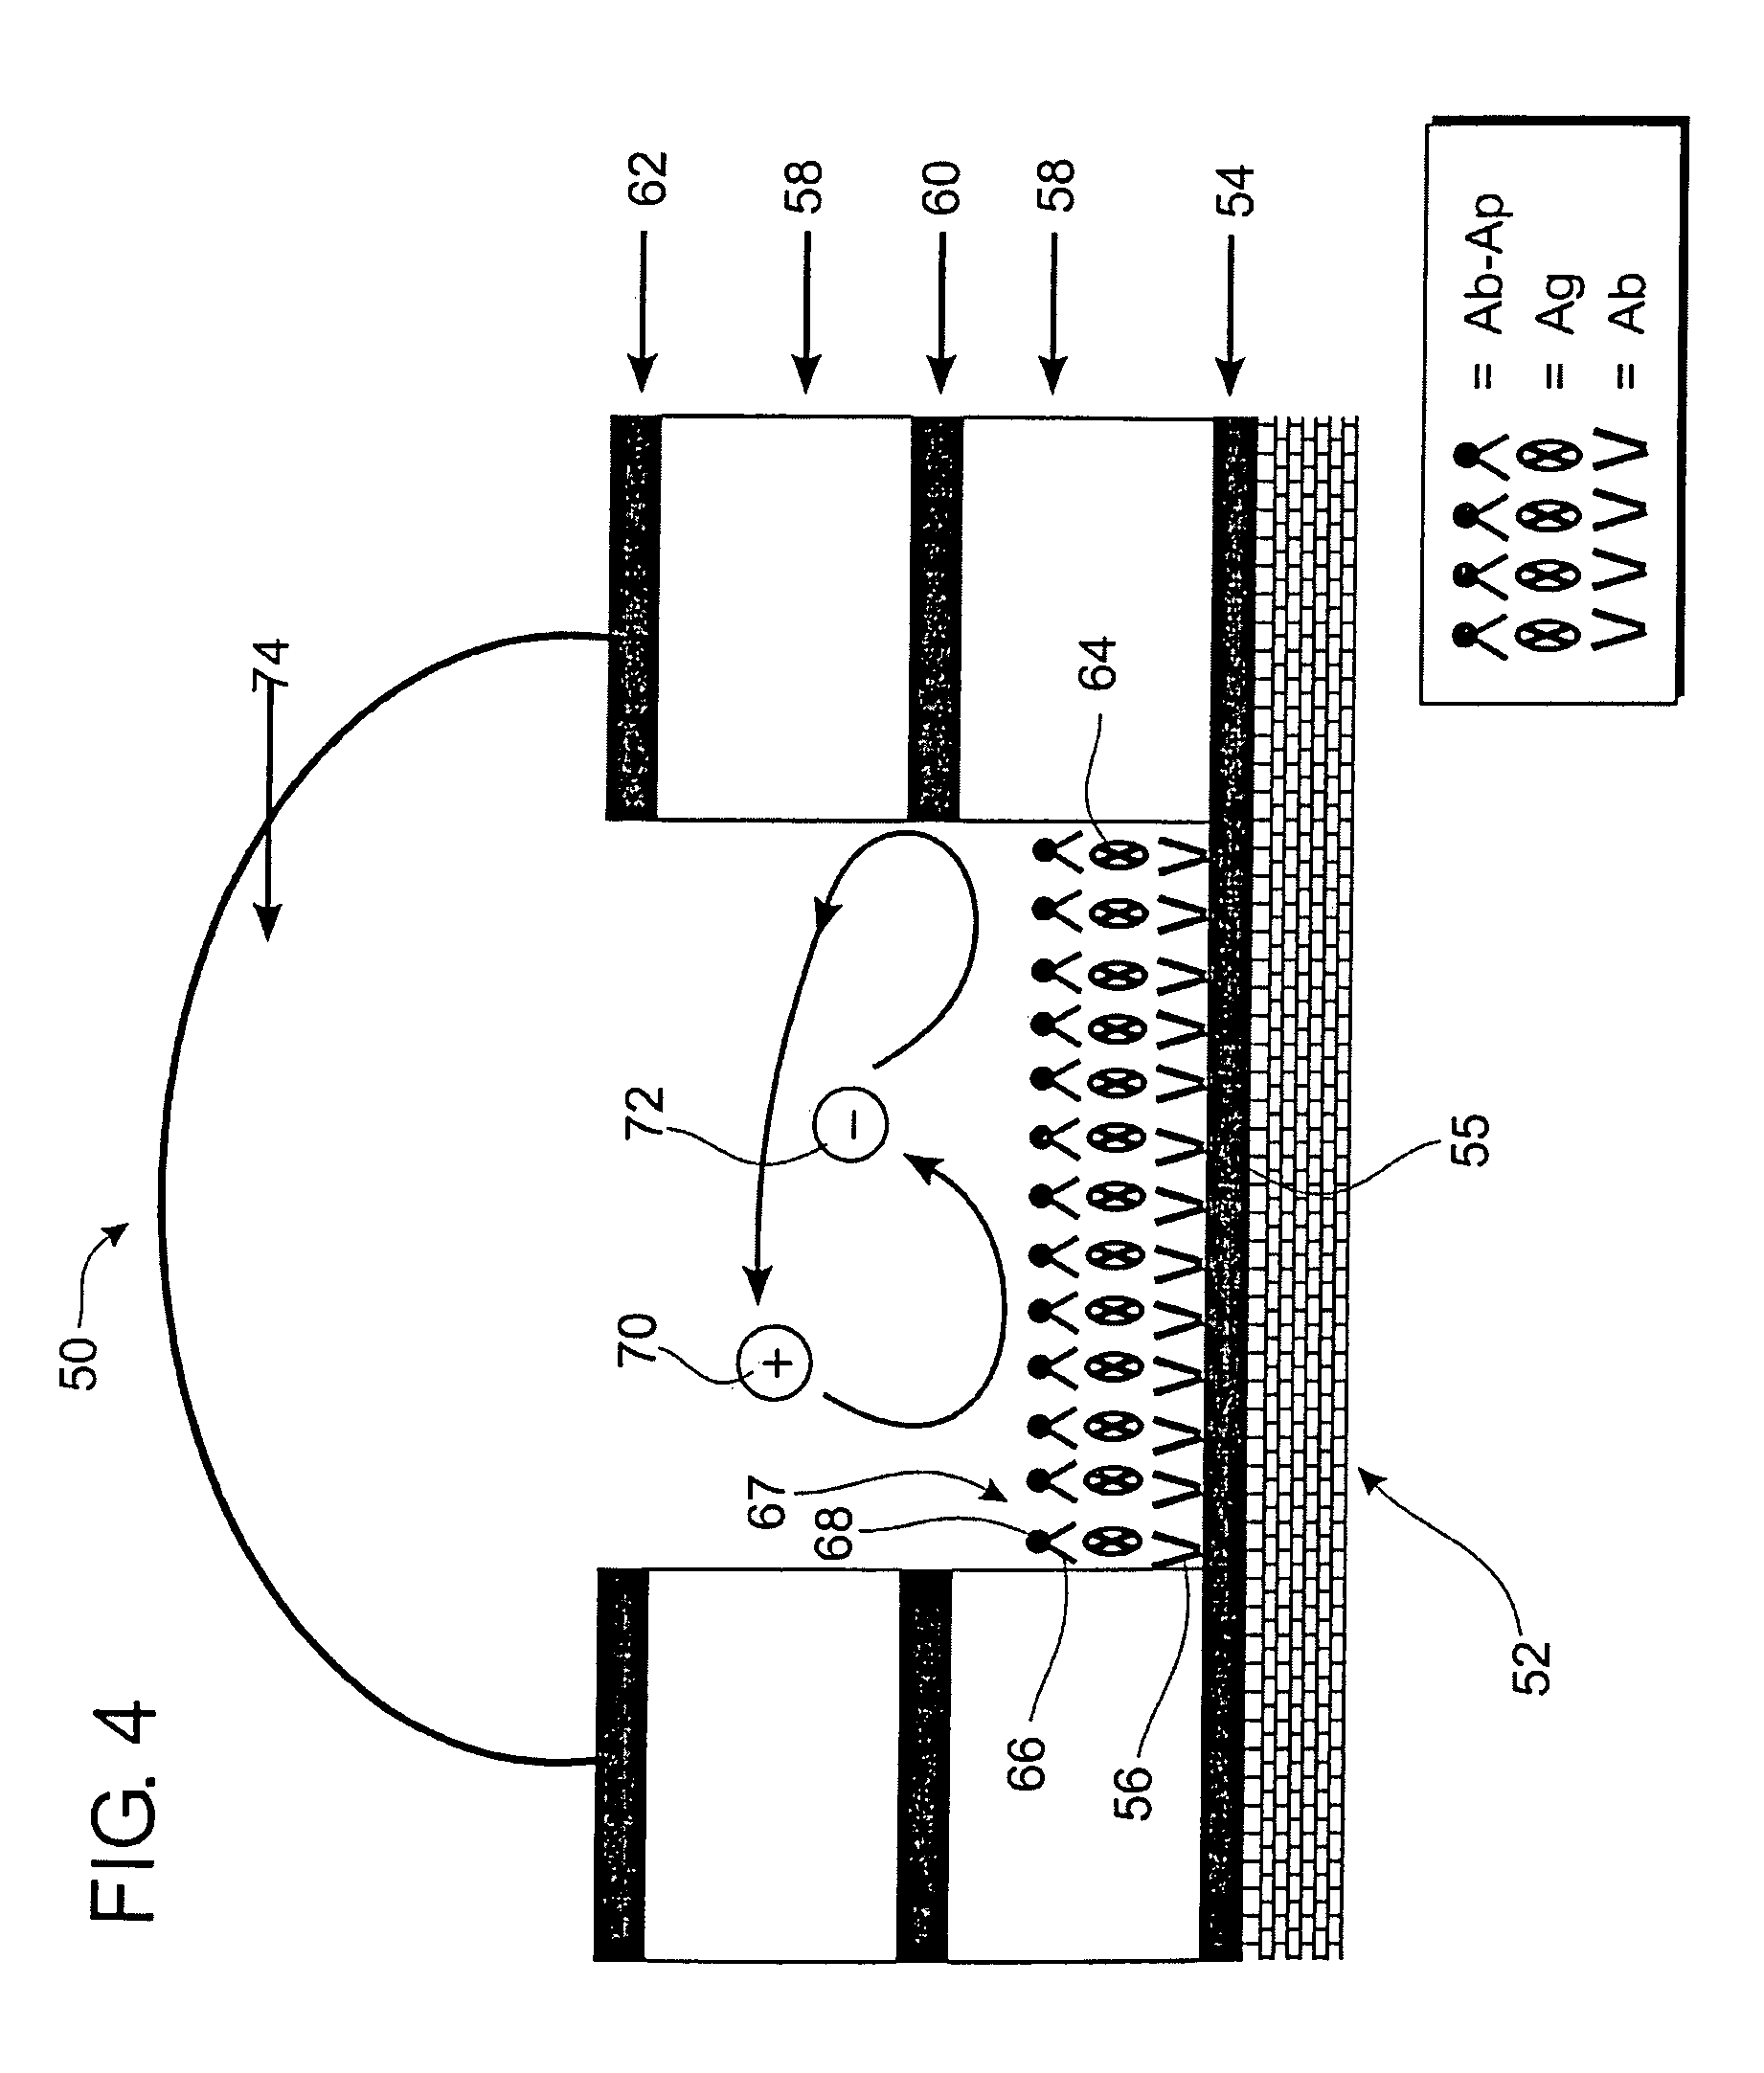 Self-contained microelectrochemical bioassay platforms and methods